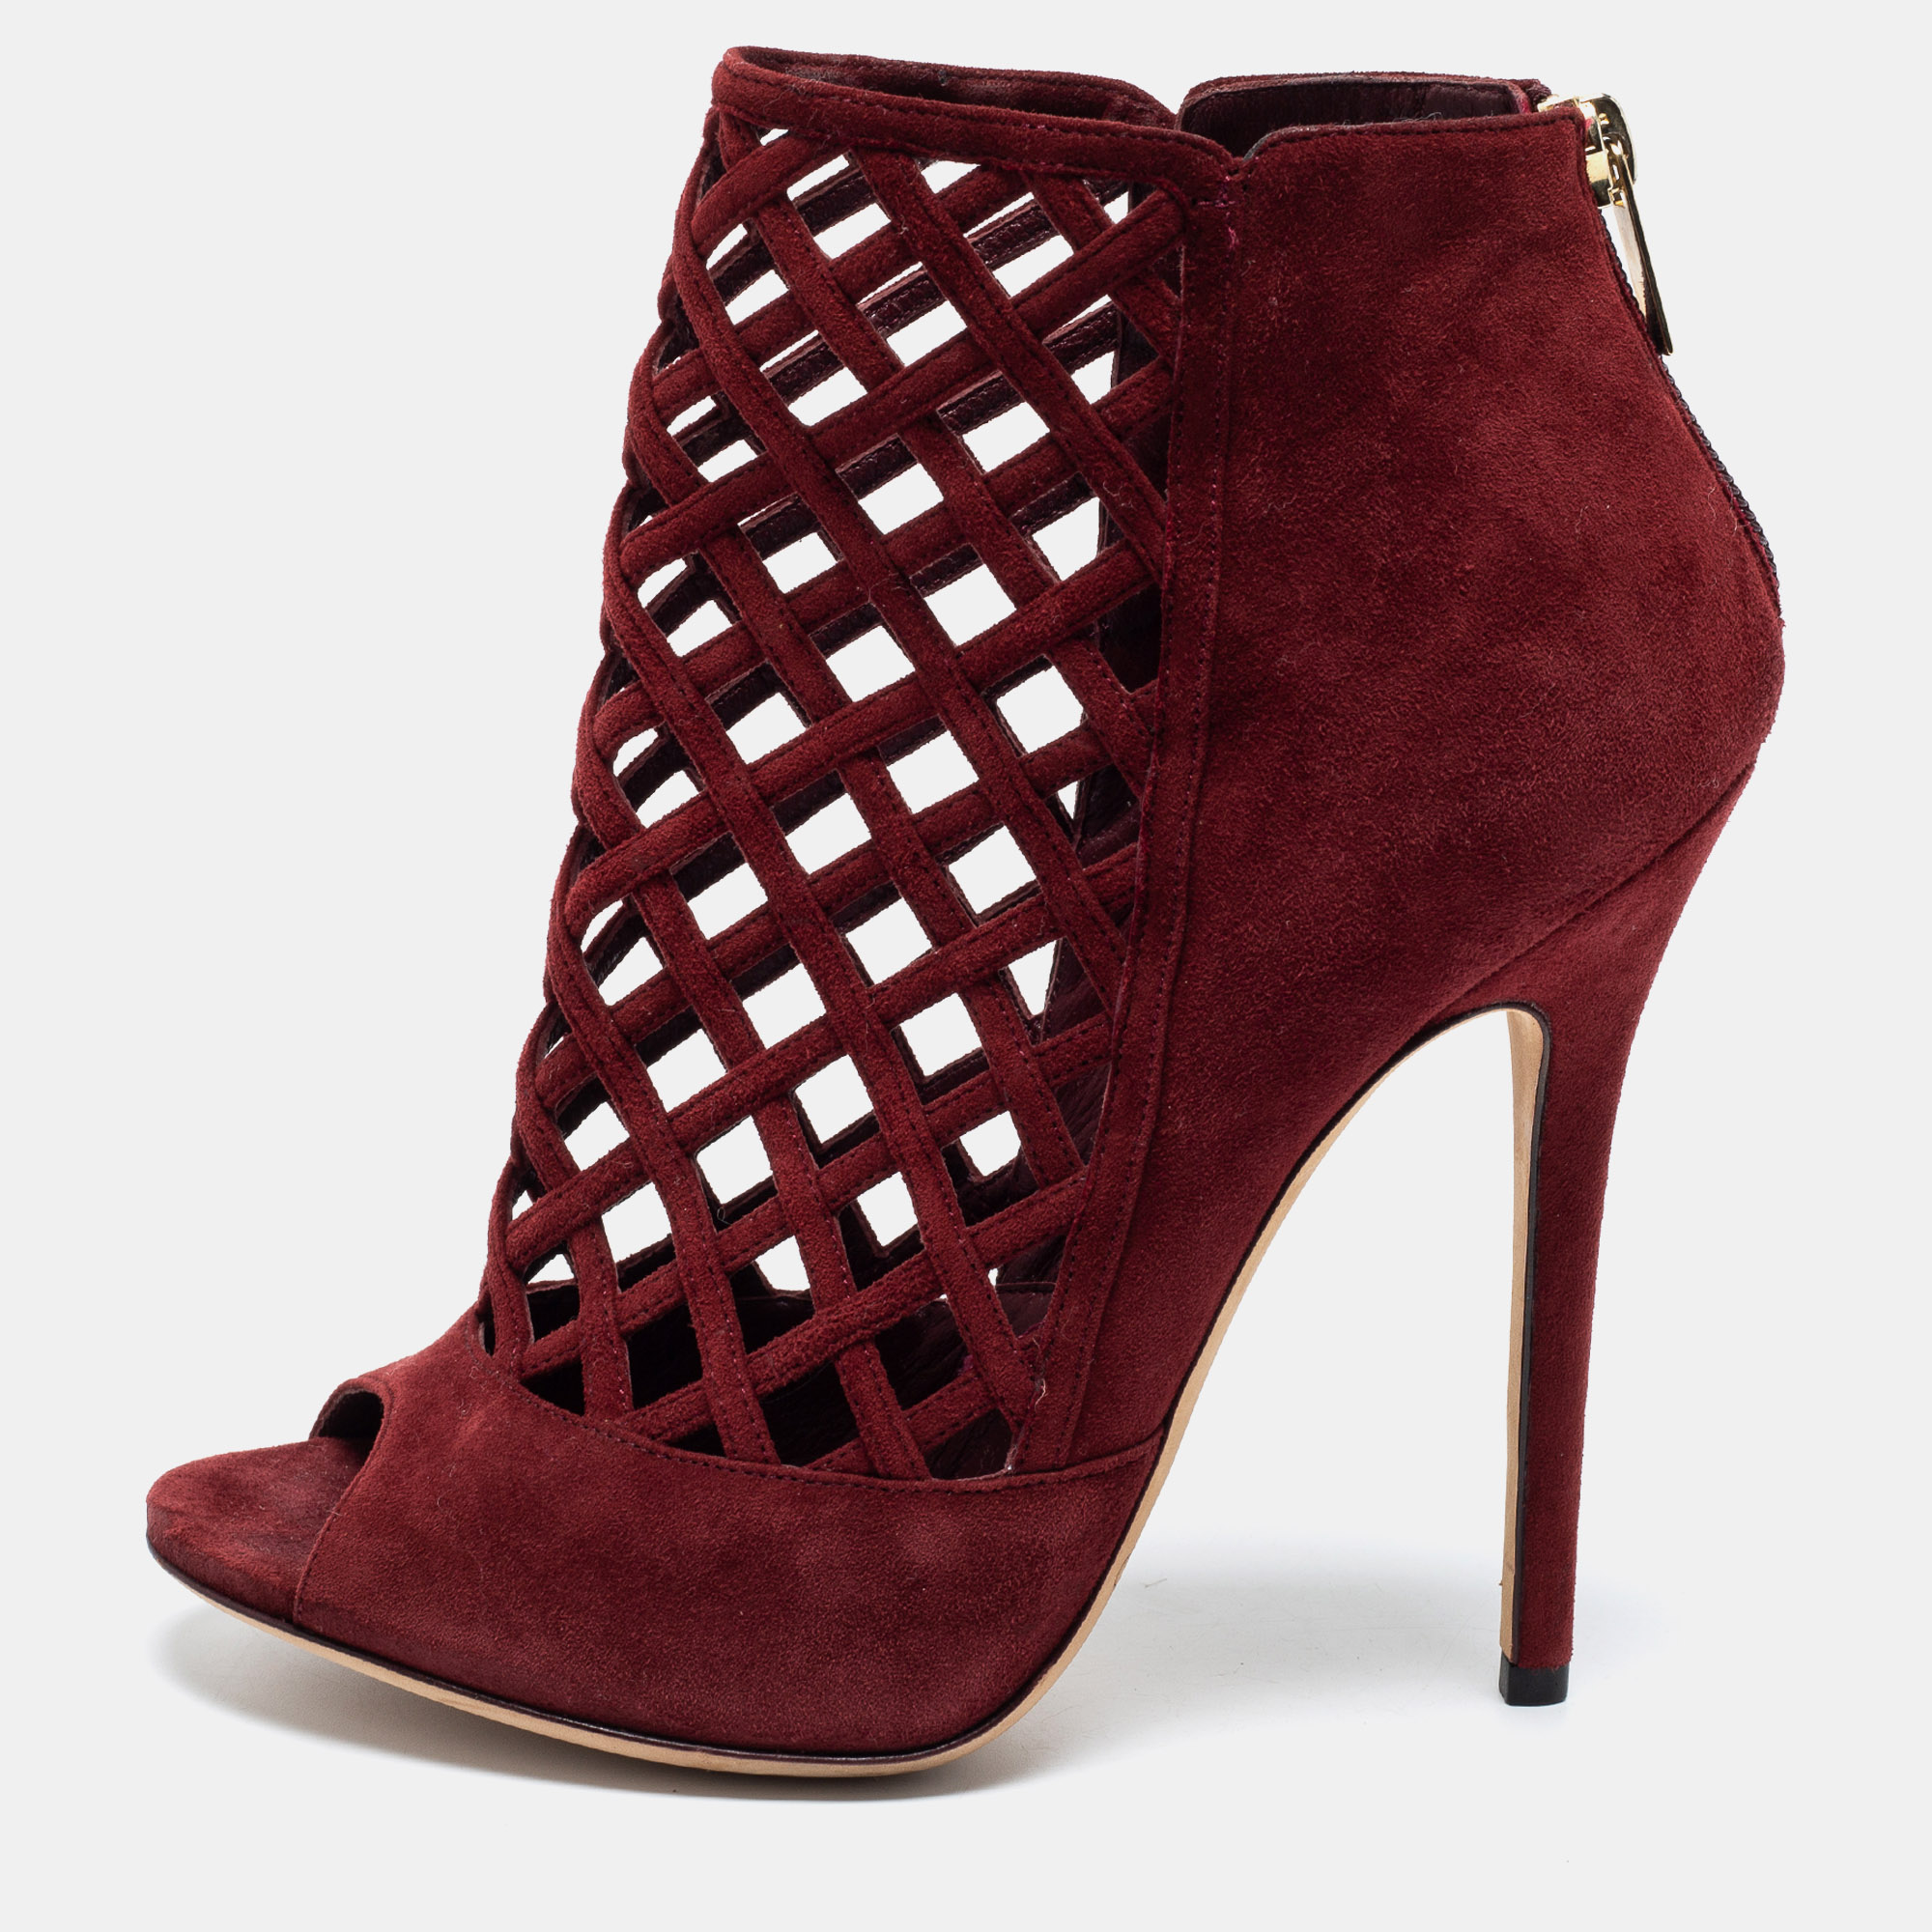 Pre-owned Jimmy Choo Burgundy Suede Drift Cut-out Peep-toe Ankle Booties Size 38